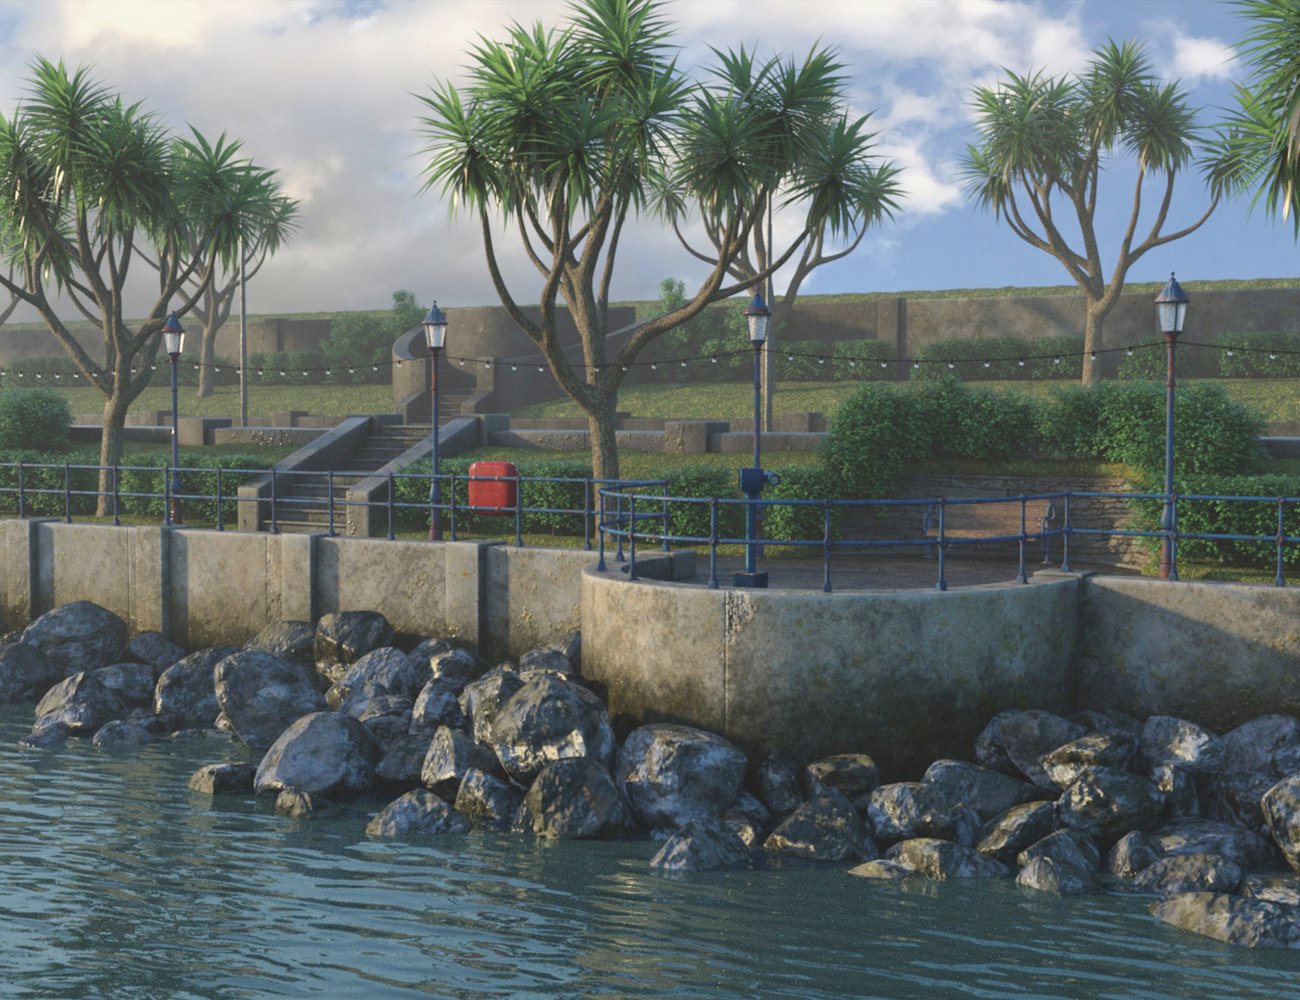 Along the Prom by: Predatron, 3D Models by Daz 3D